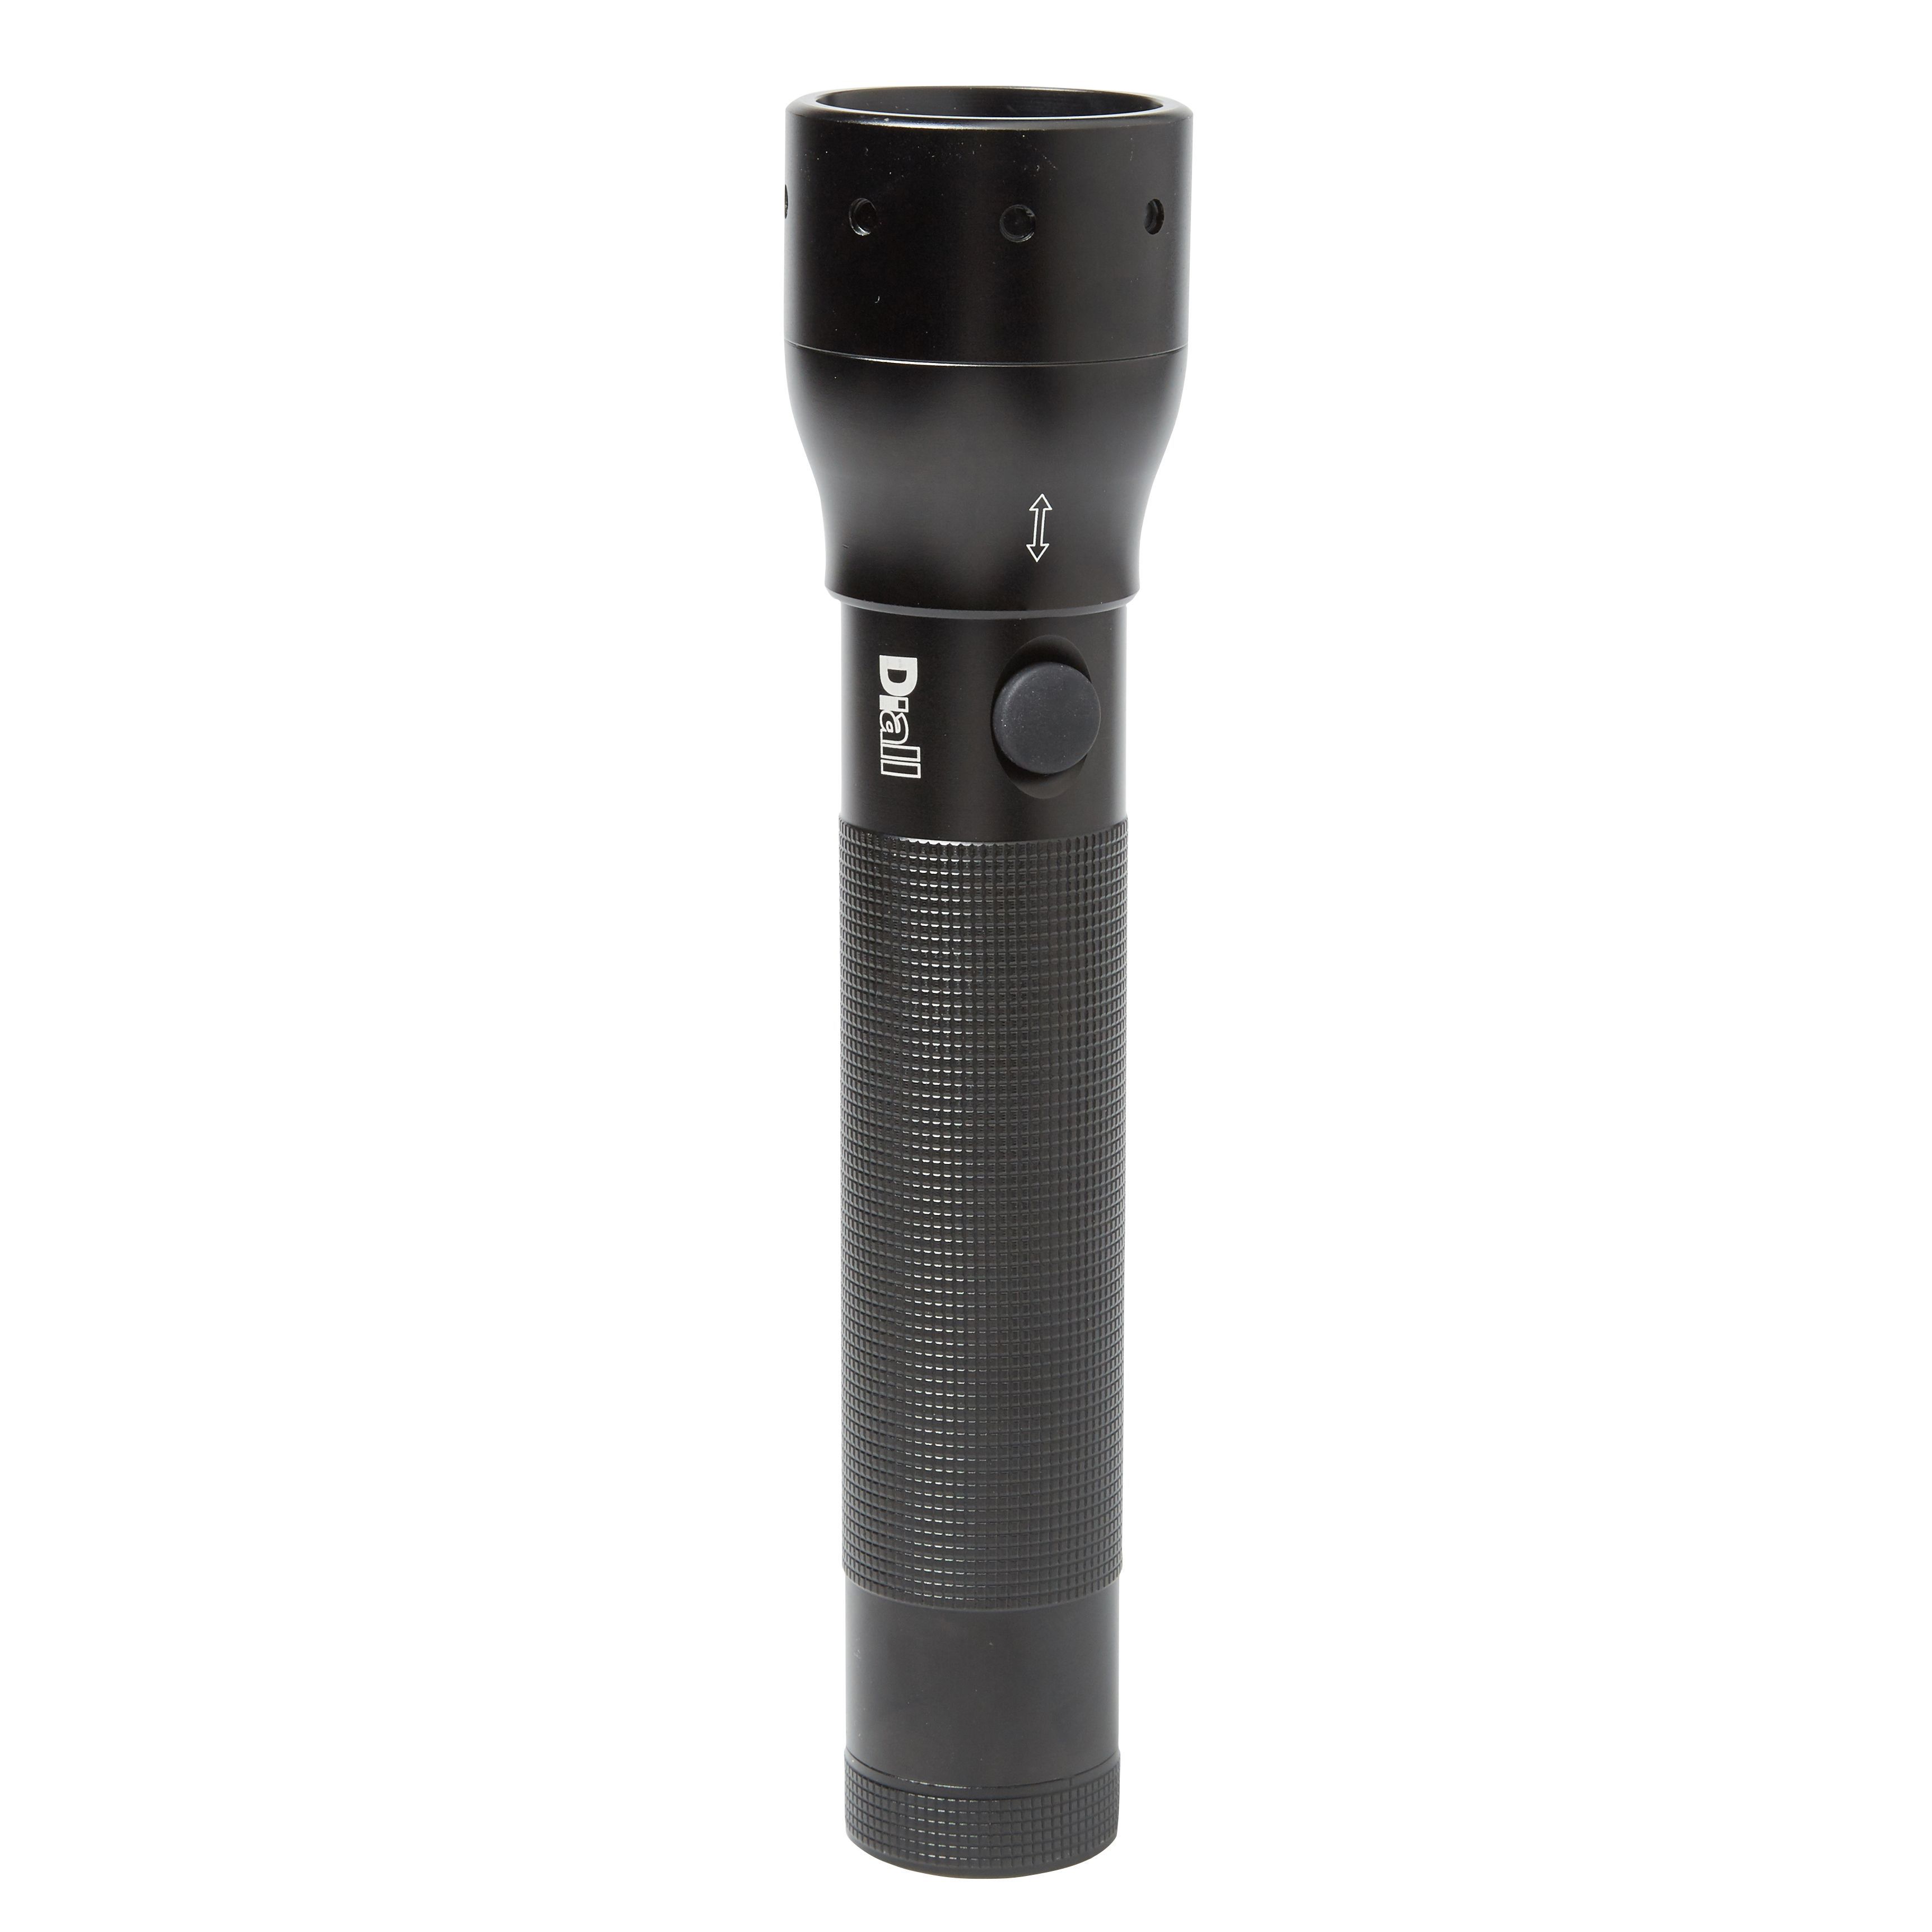 Diall Pro LED Torch